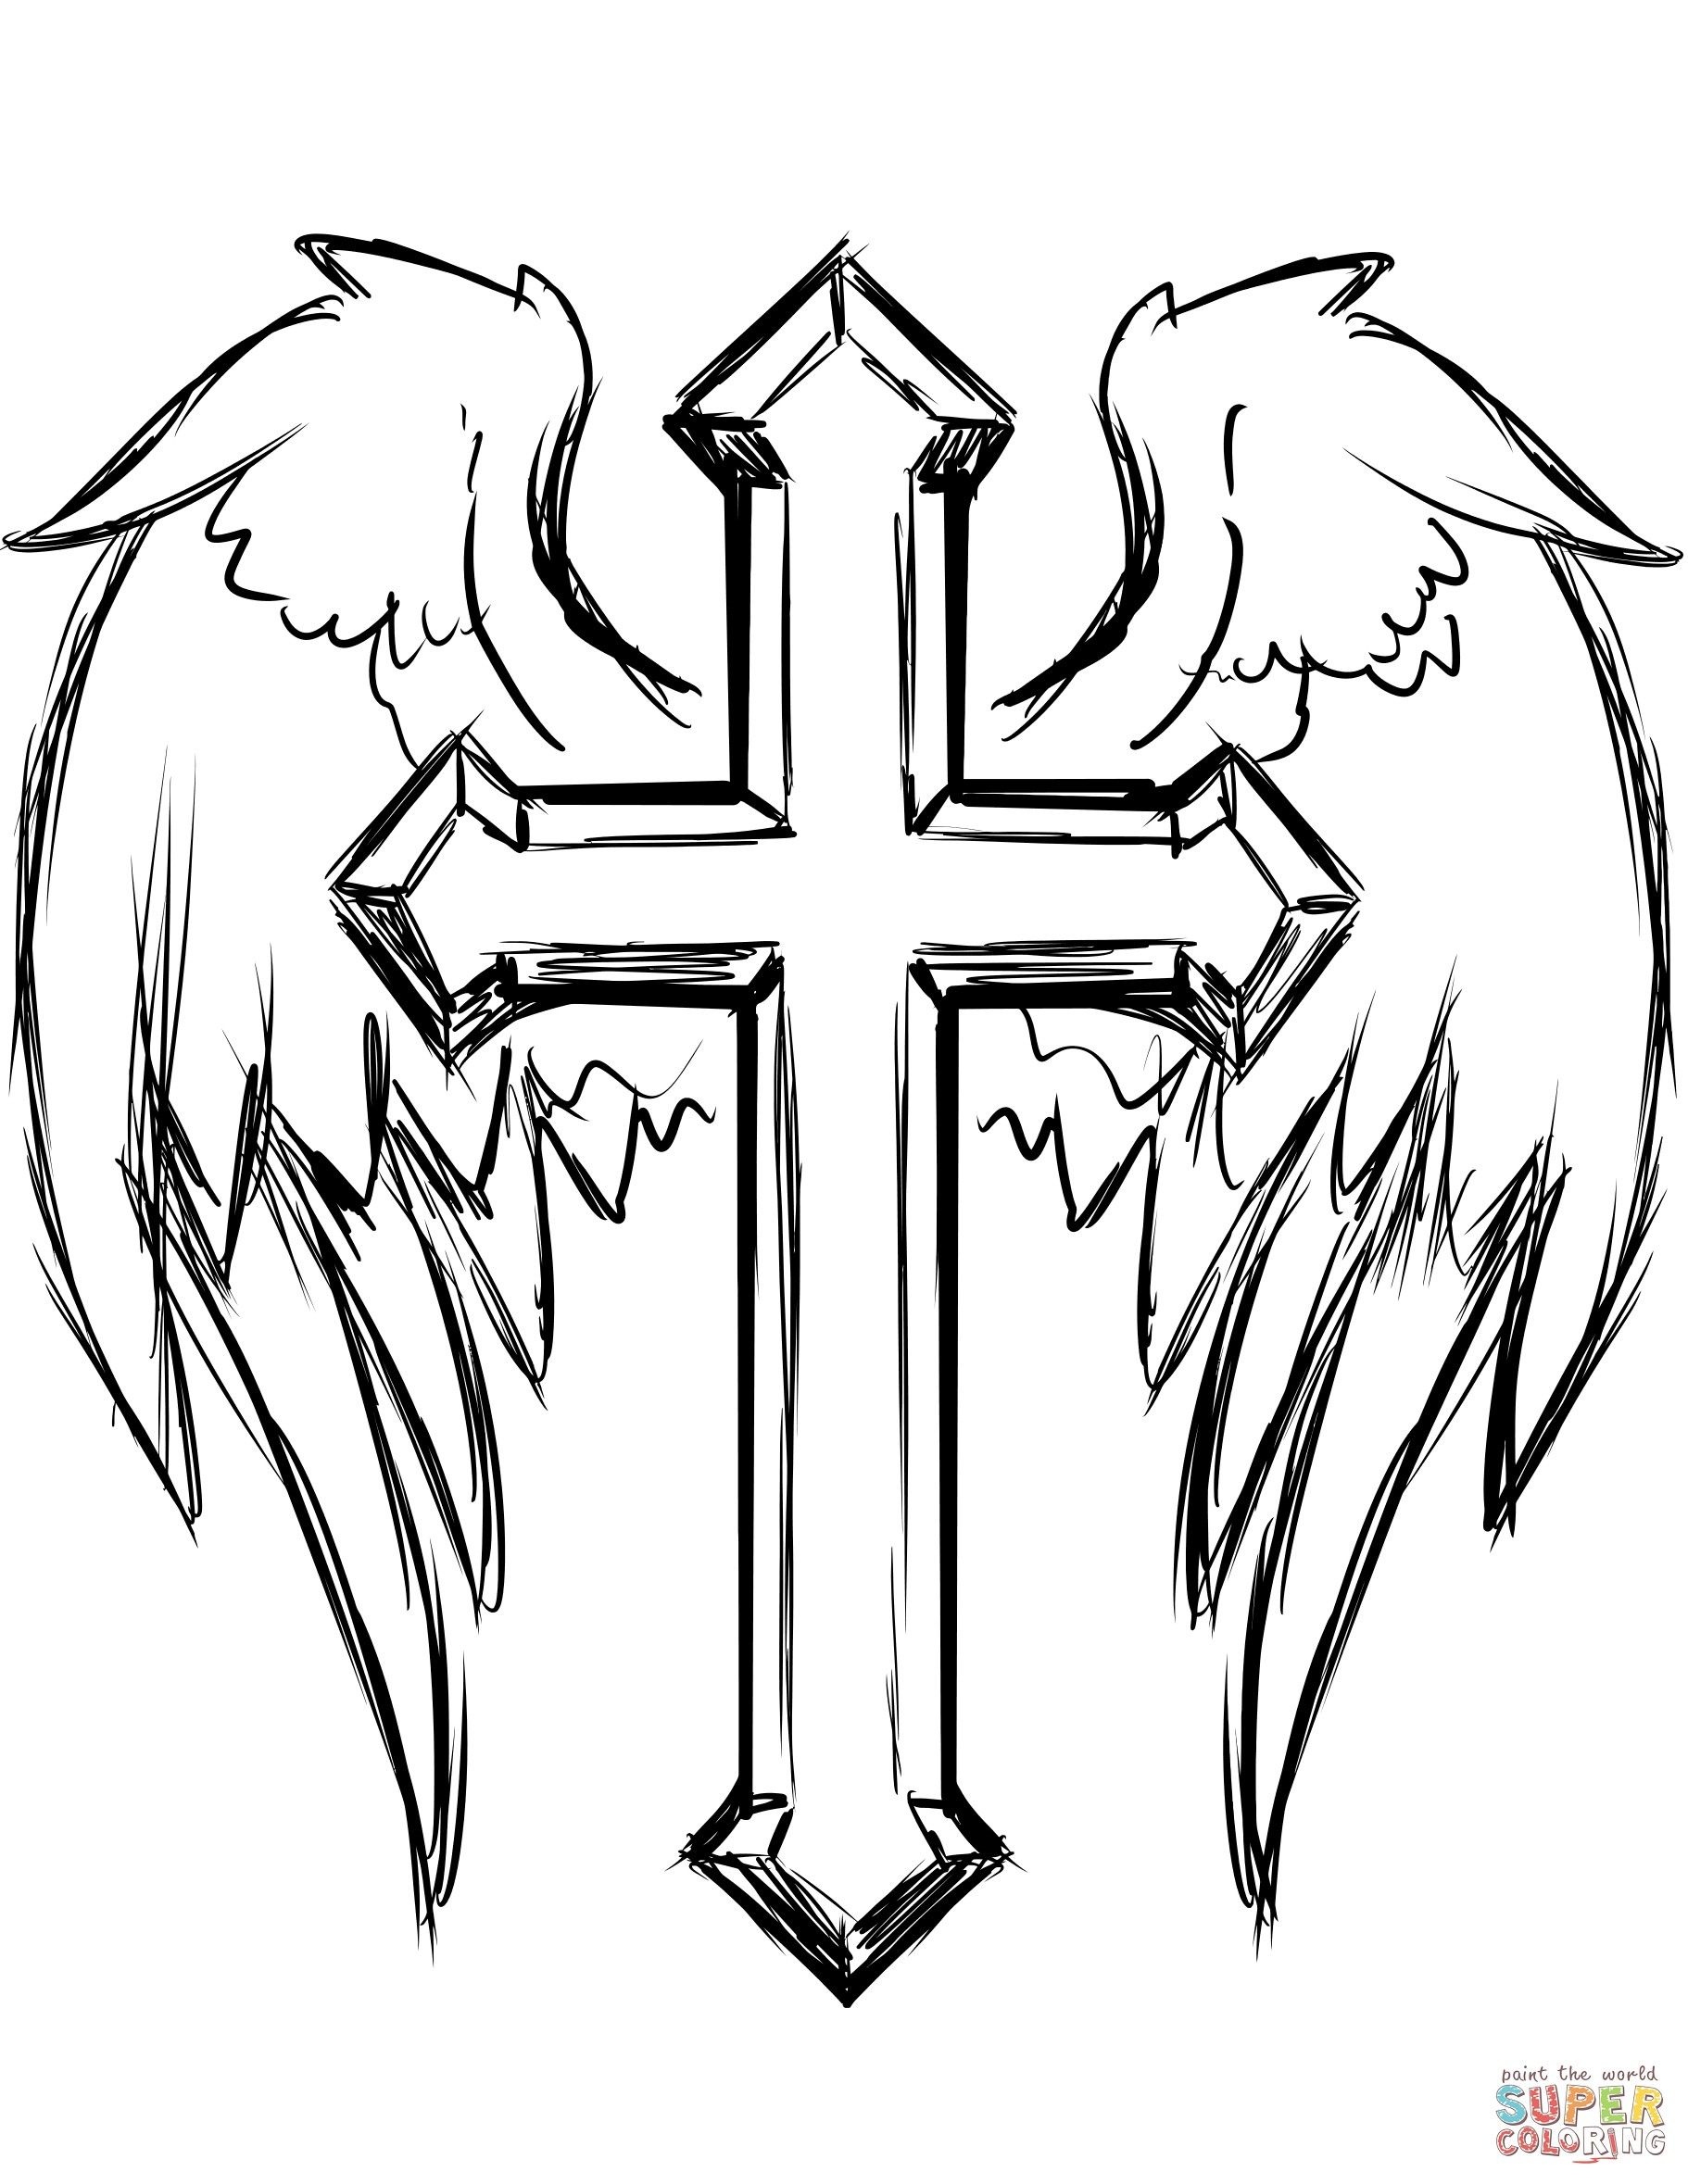 Cross Coloring Pages Fresh Cross With Wings Coloring Page | Coloring - Free Printable Cross Tattoo Designs